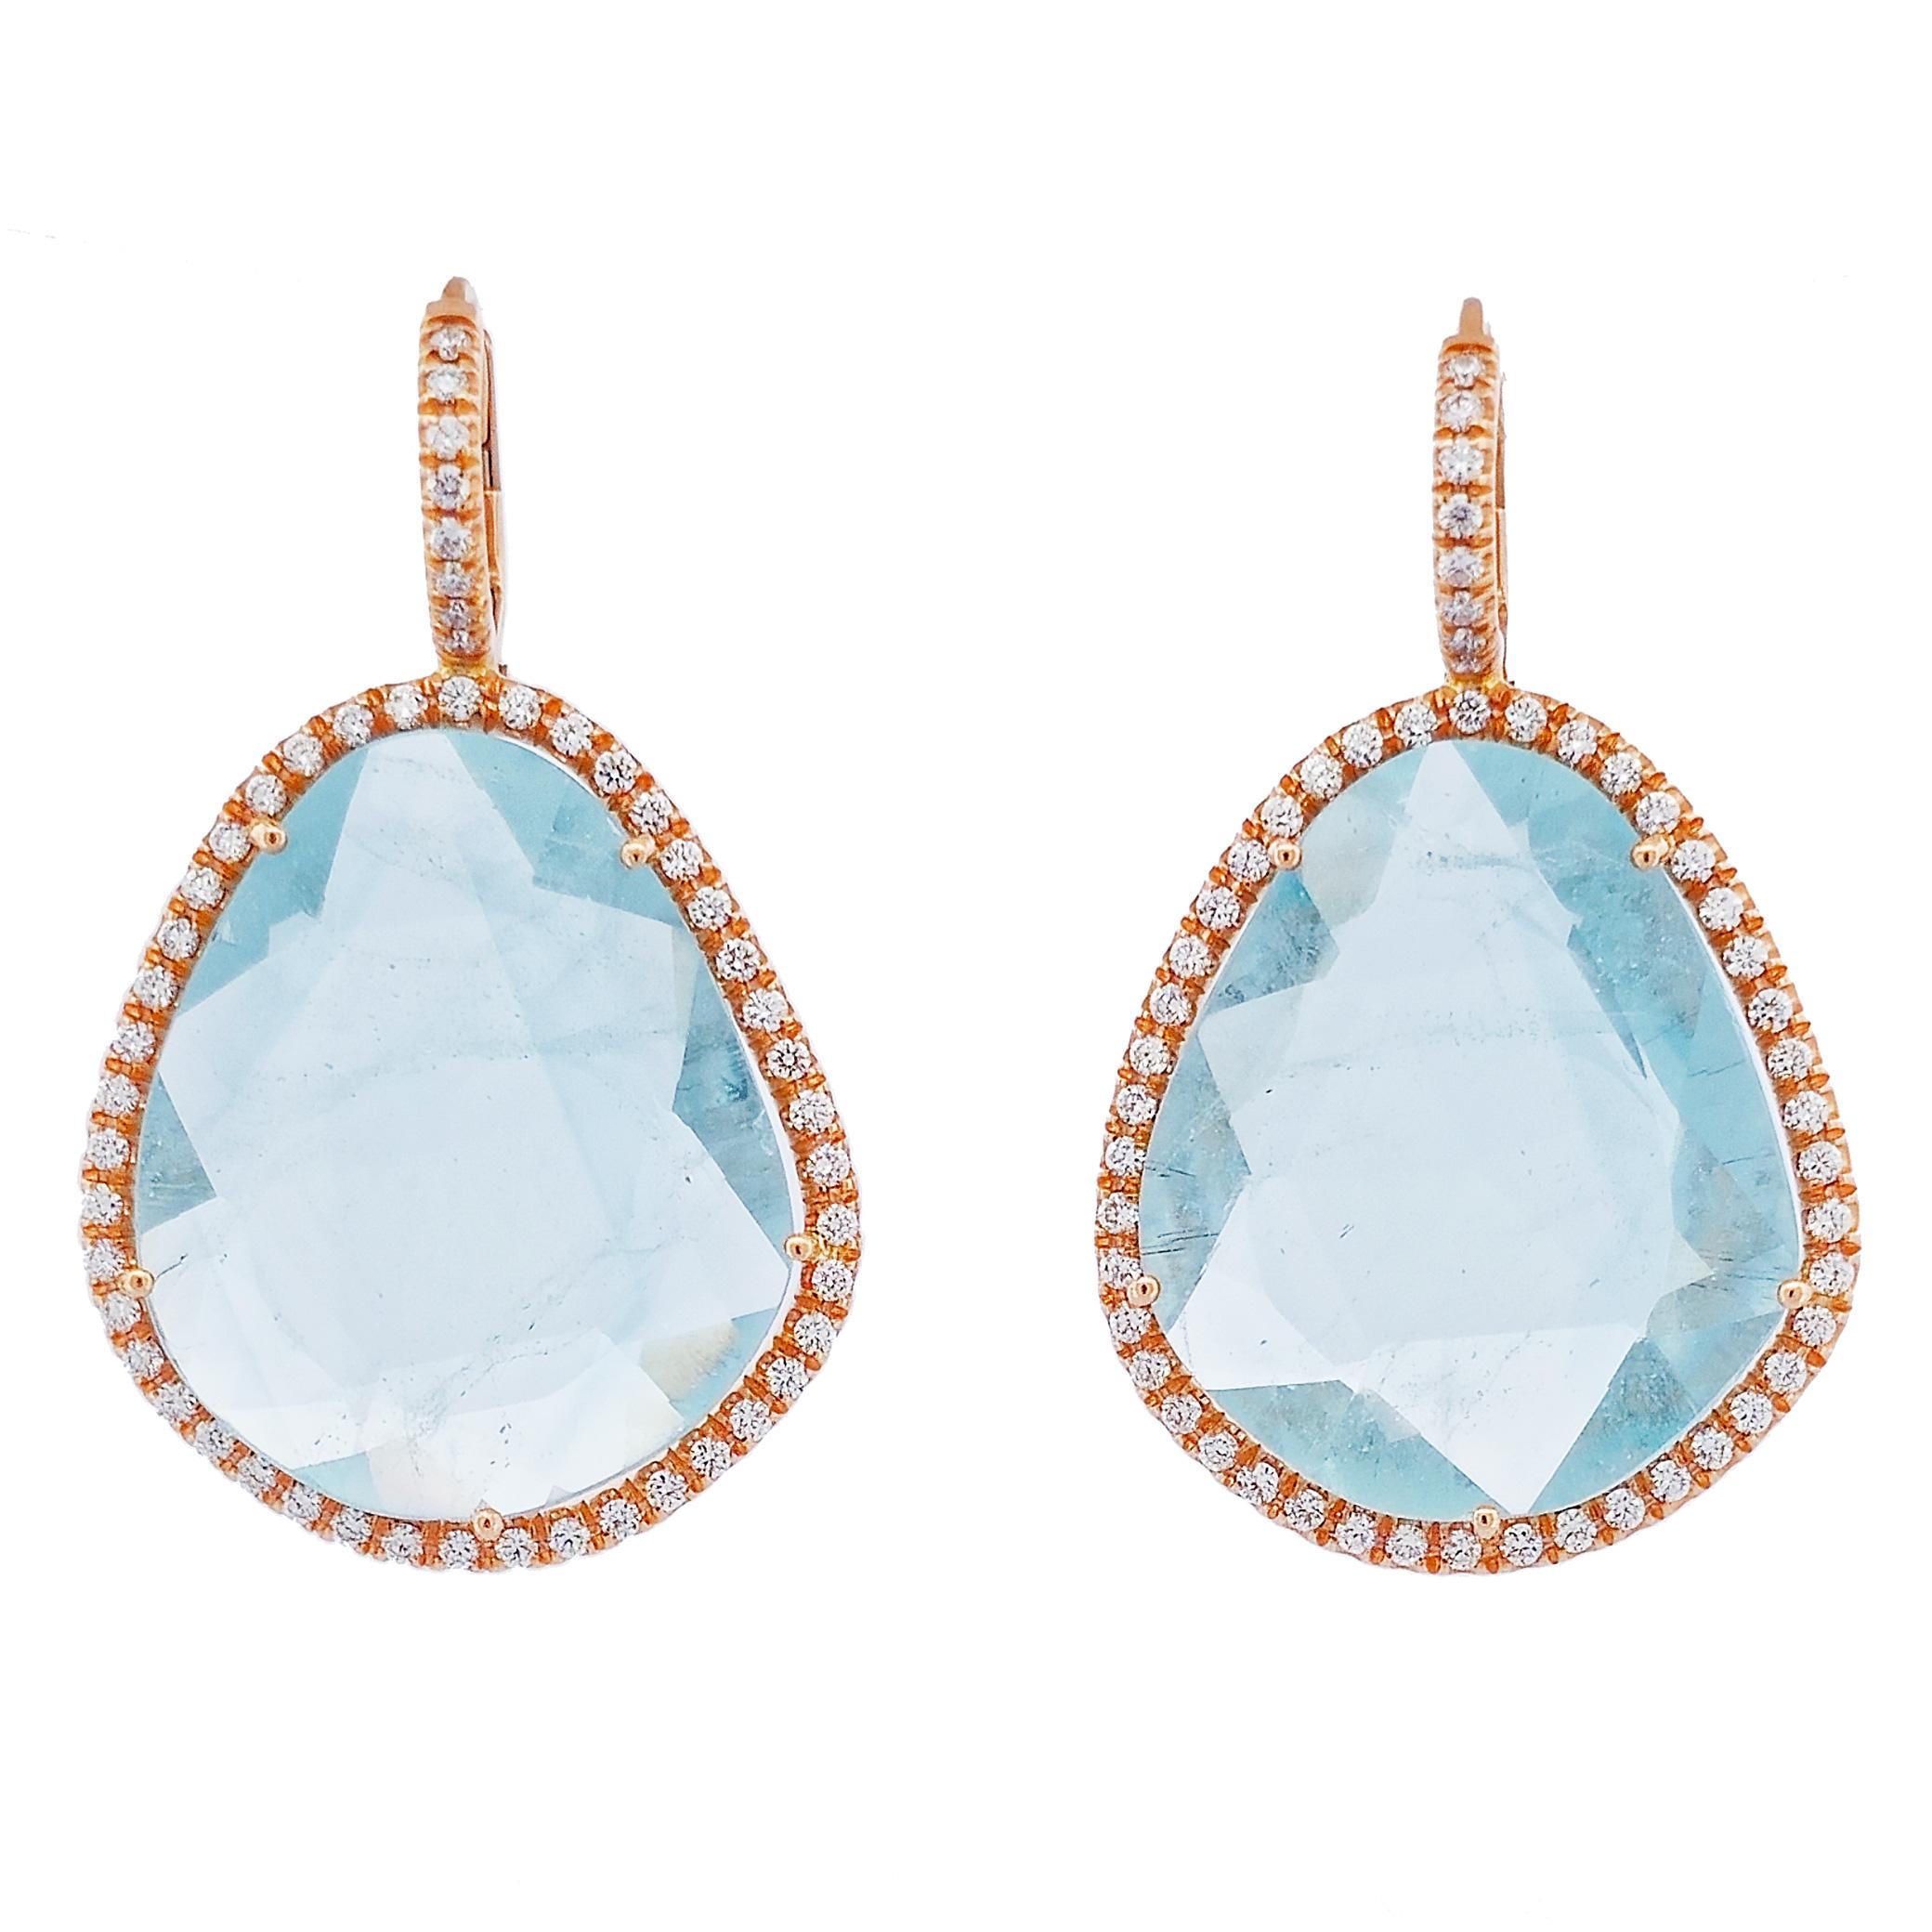 Revel in the rare beauty of these 18 karat rose gold, blue topaz, diamond pave drop earrings. 

They are handmade and one of a kind. 
Featuring magnificent large blue topaz slices that have a total weight of 51.65 carats. 

There is an additional